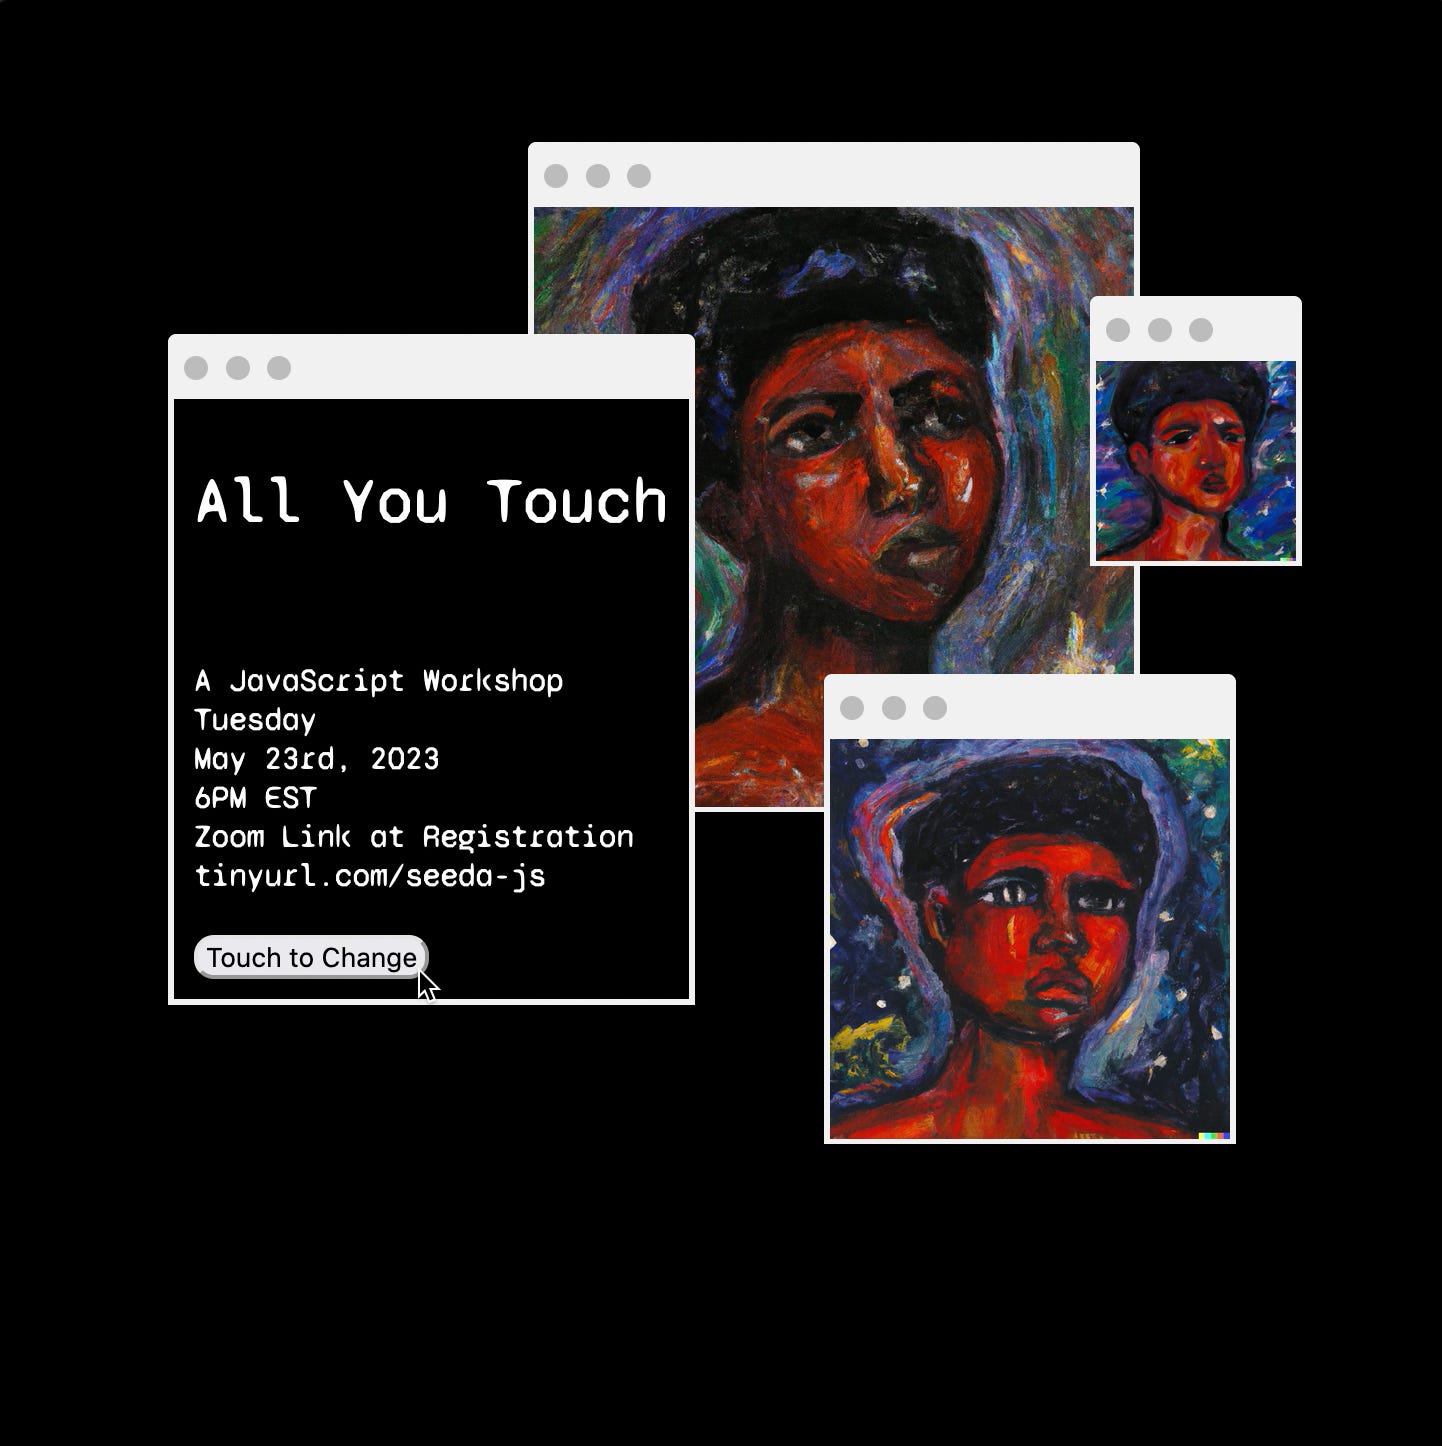 Screen shots of css browser windows of oil painting of black folks amongst the starts layered under text reading "All You Touch A JavaScript Workshop" with date and time of Tuesday May 23rd 6pm EST